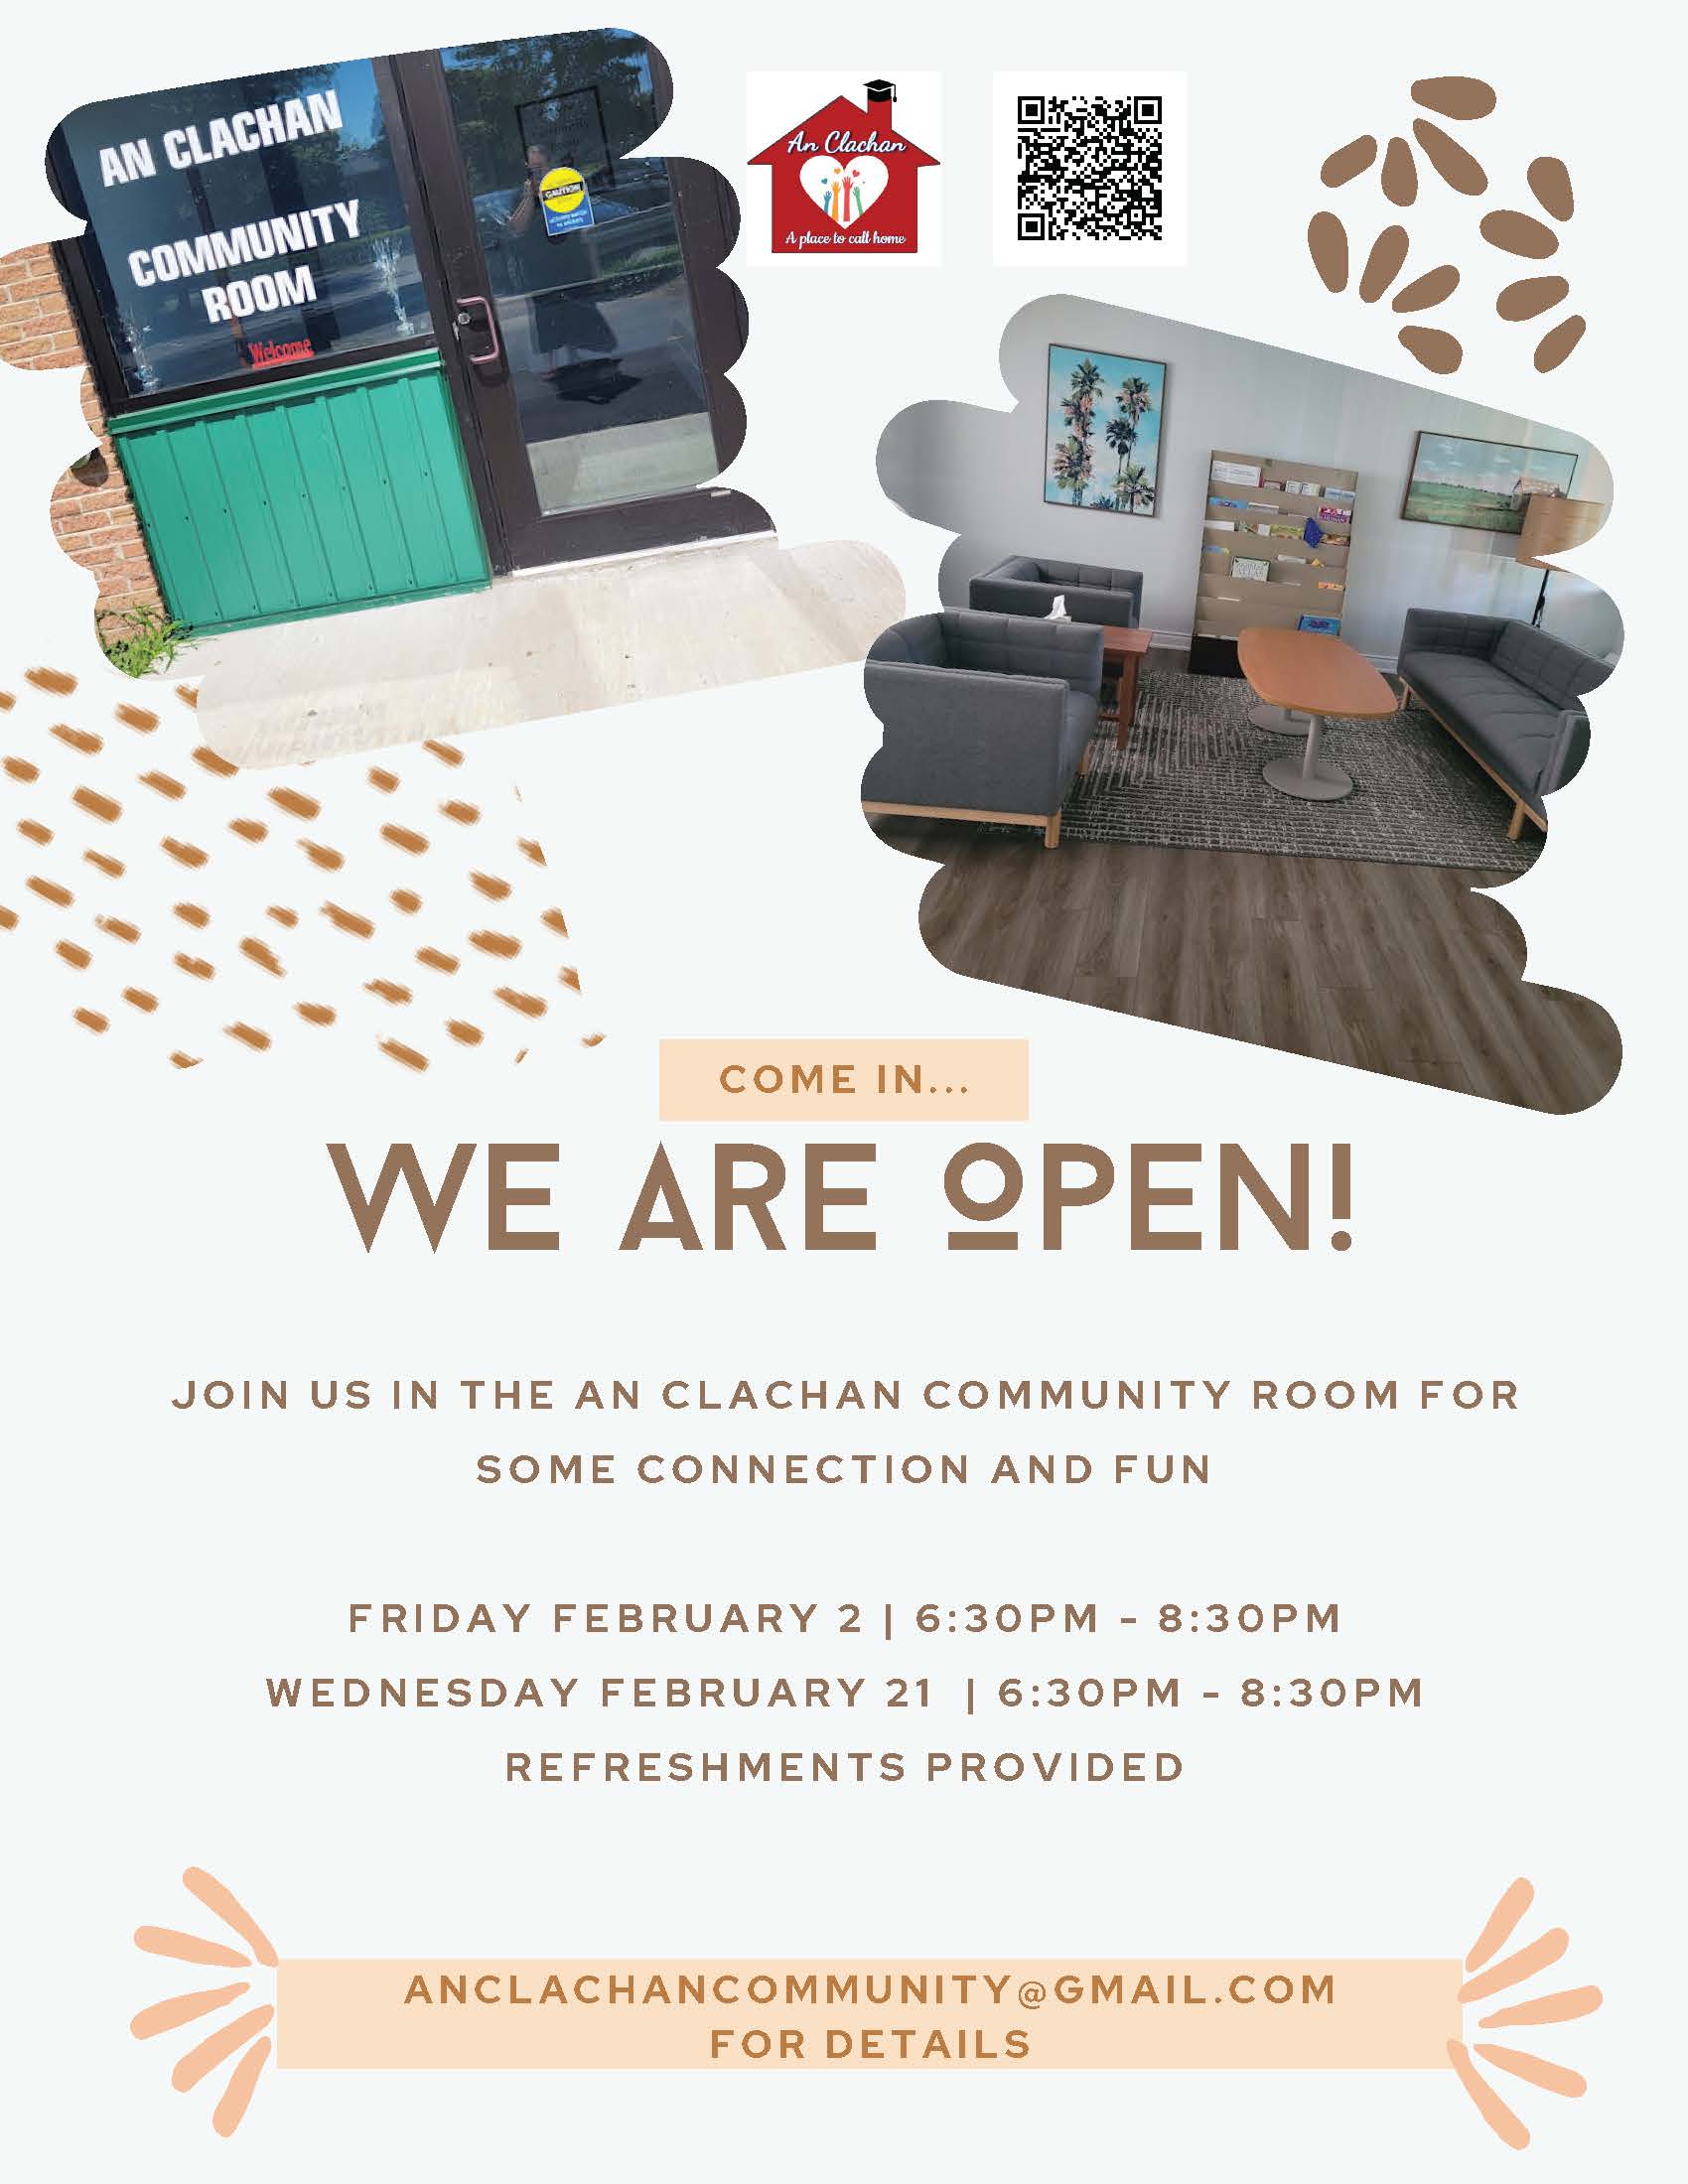 Come in..we are open! Join us in the An Clachan Community Room for some connection and fun. Friday February 2nd from 6:30PM - 8:30PM. Wednesday February 21st from 6:30PM - 8:30PM. Refreshments provided. Anclachancommunity@gmail.com for details.